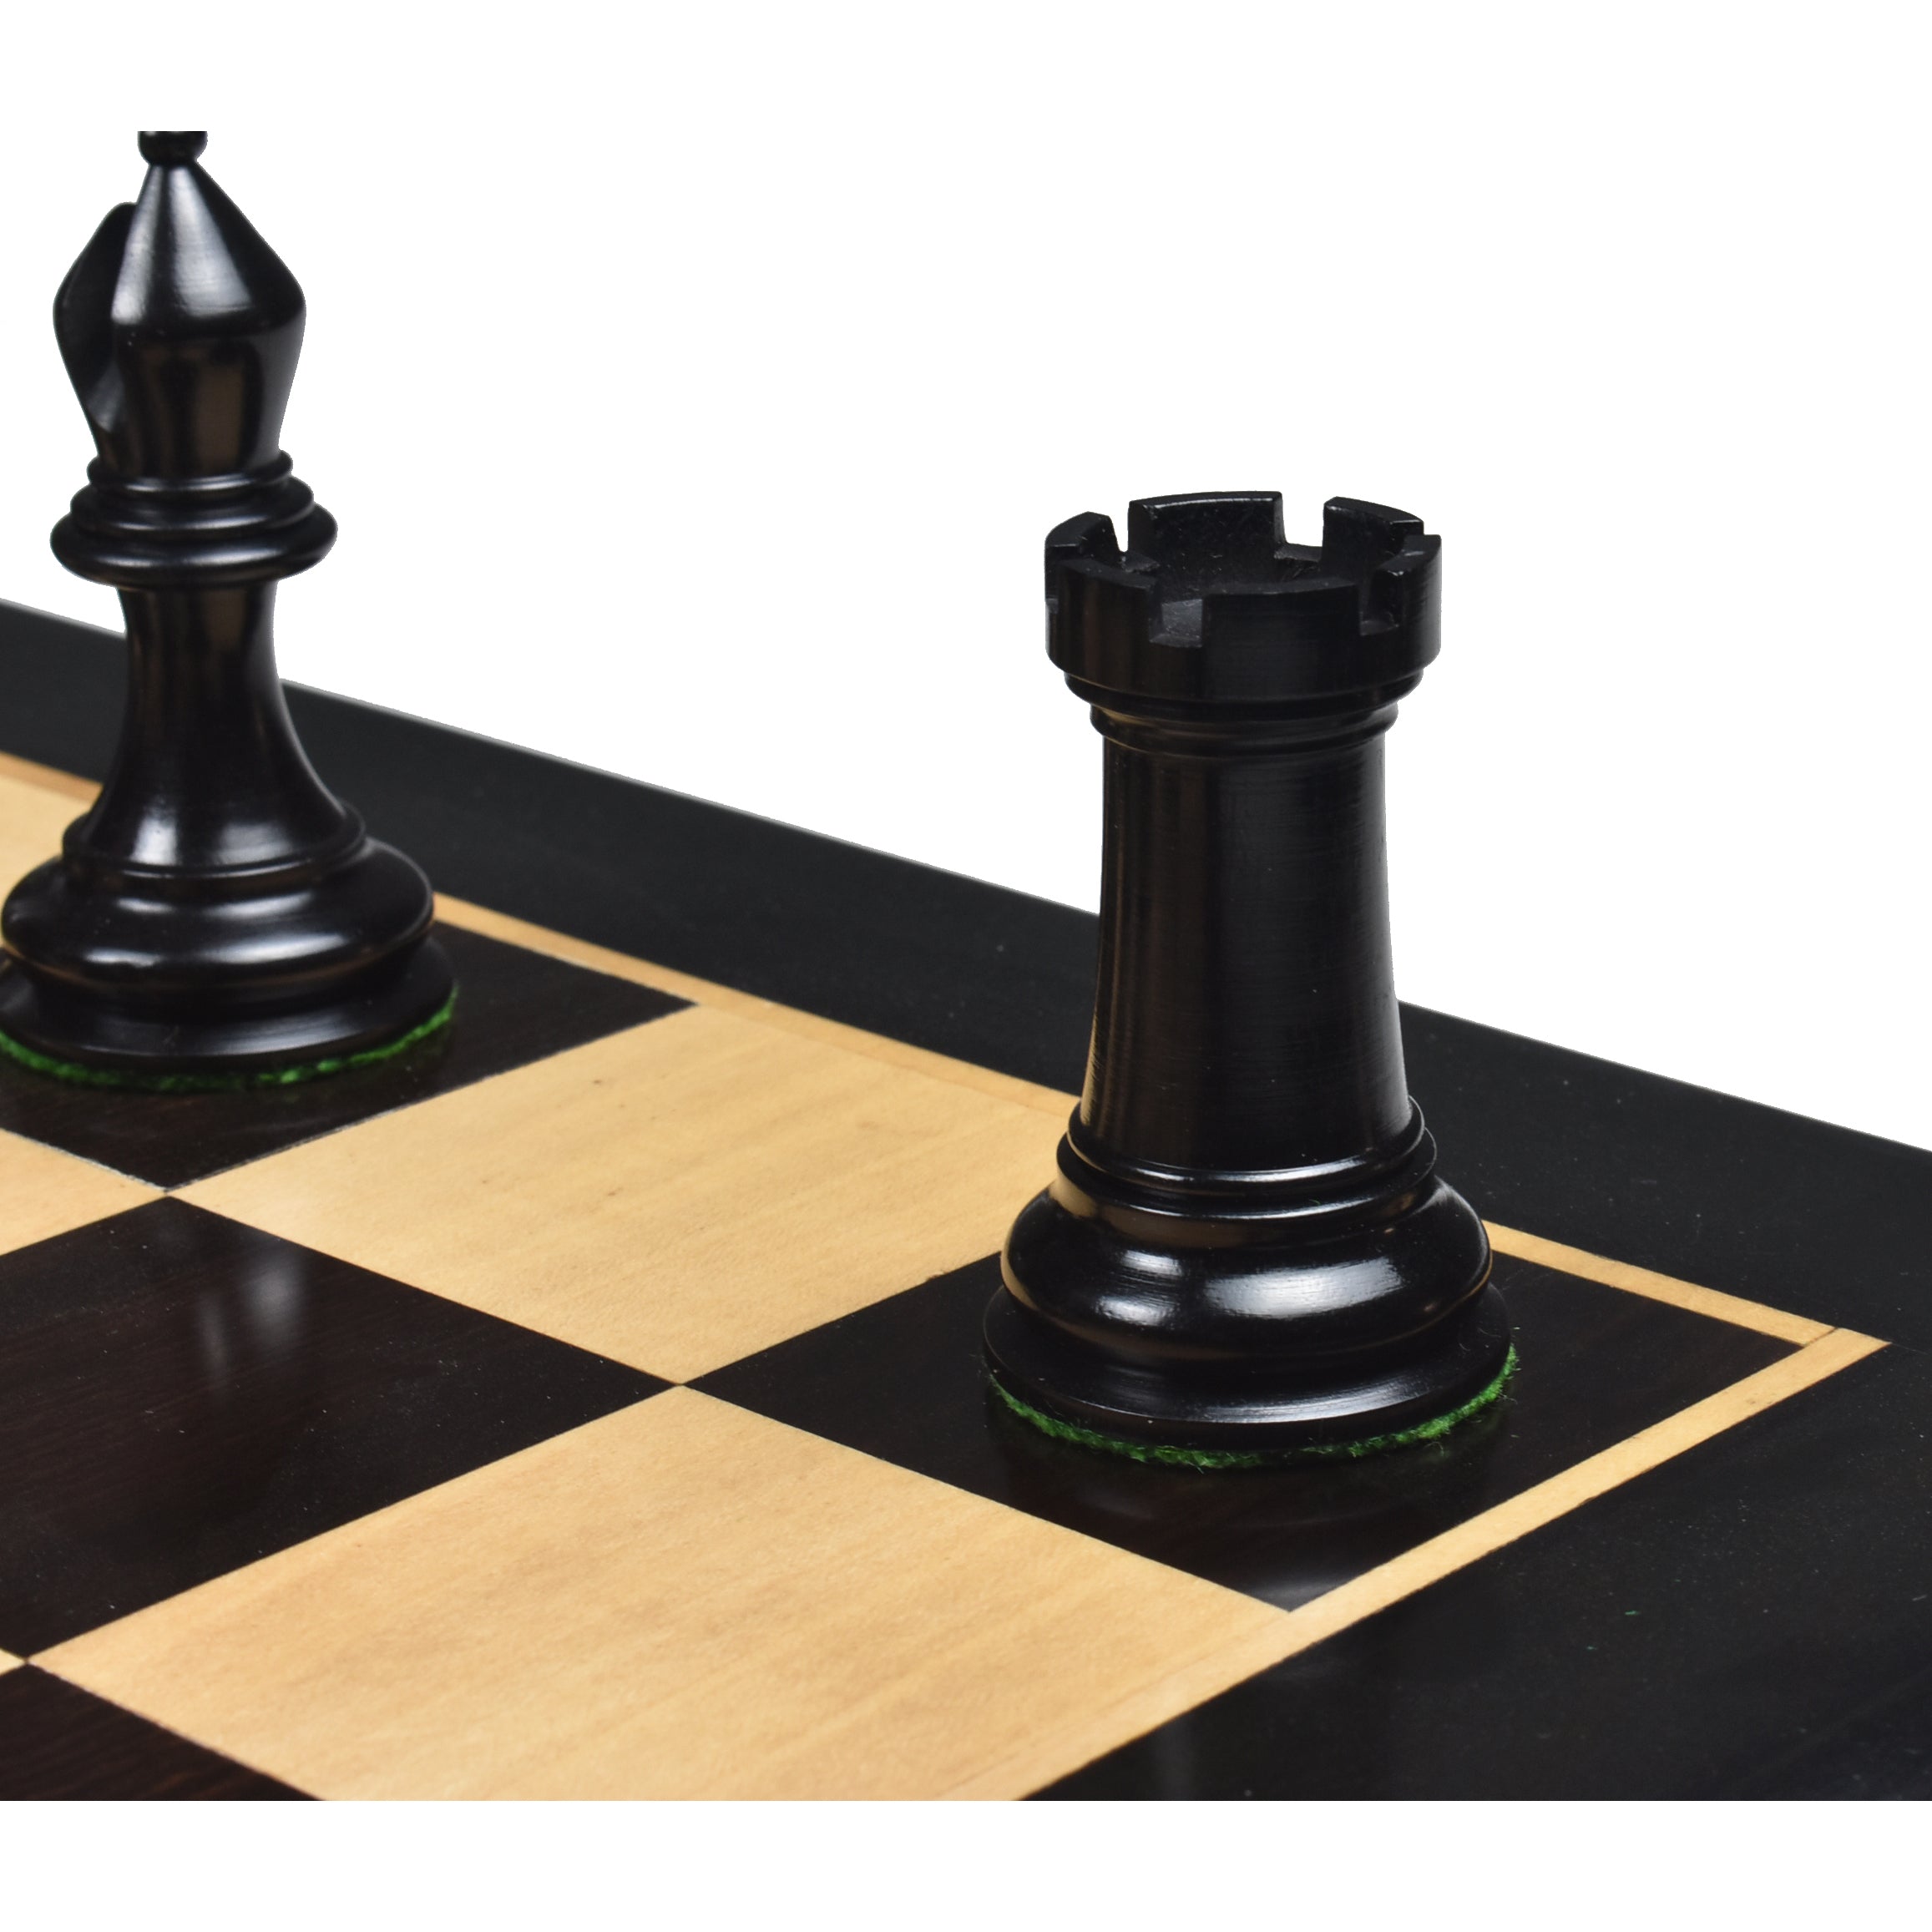 Repro 2016 Sinquefield Staunton Chess Pieces Only Set